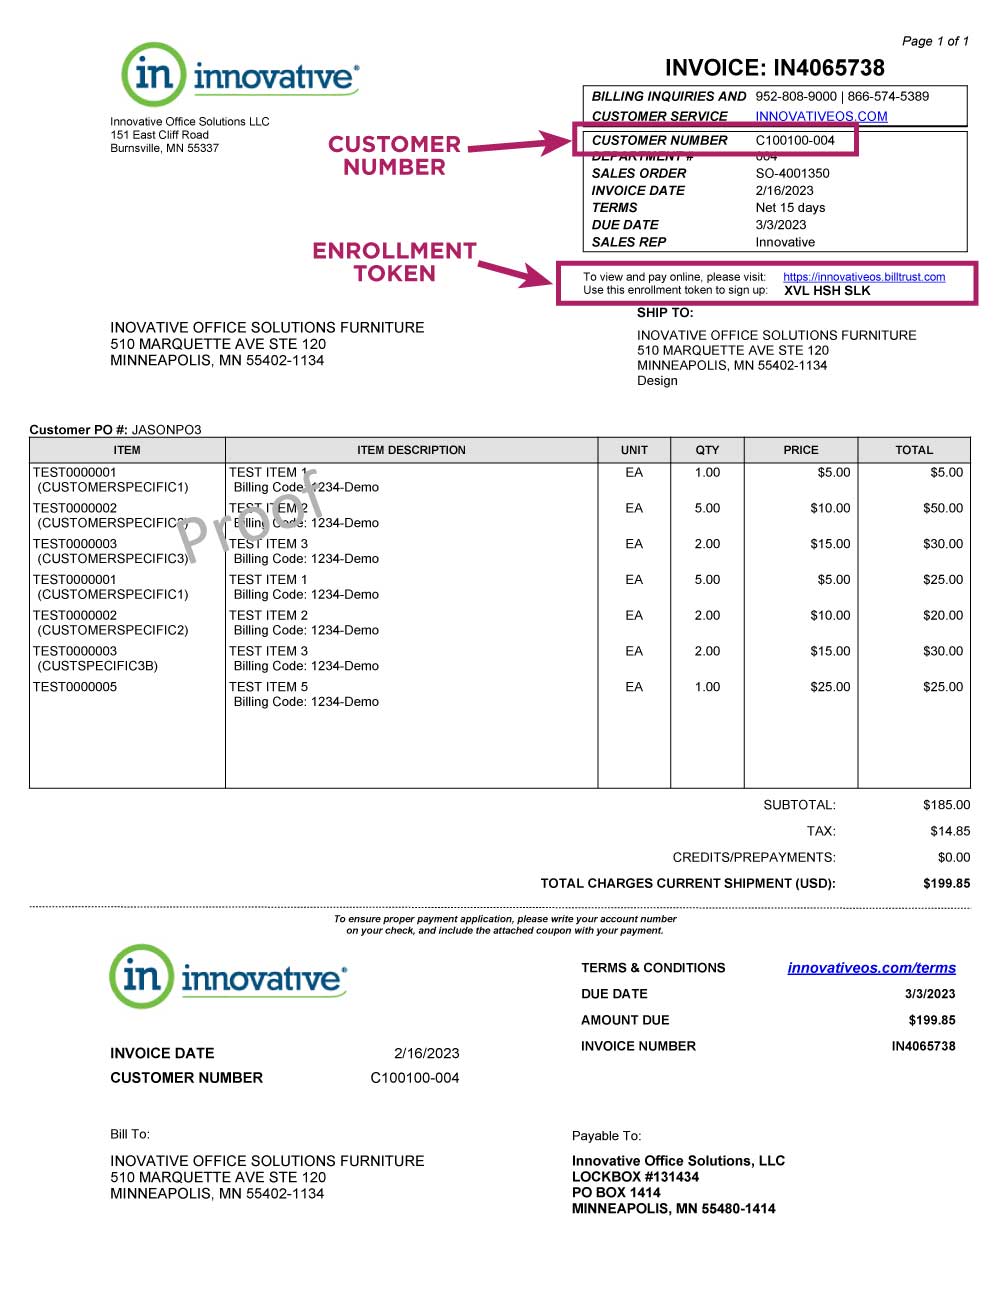 Innovative Sample Invoice with Customer Number and Enrollment Token